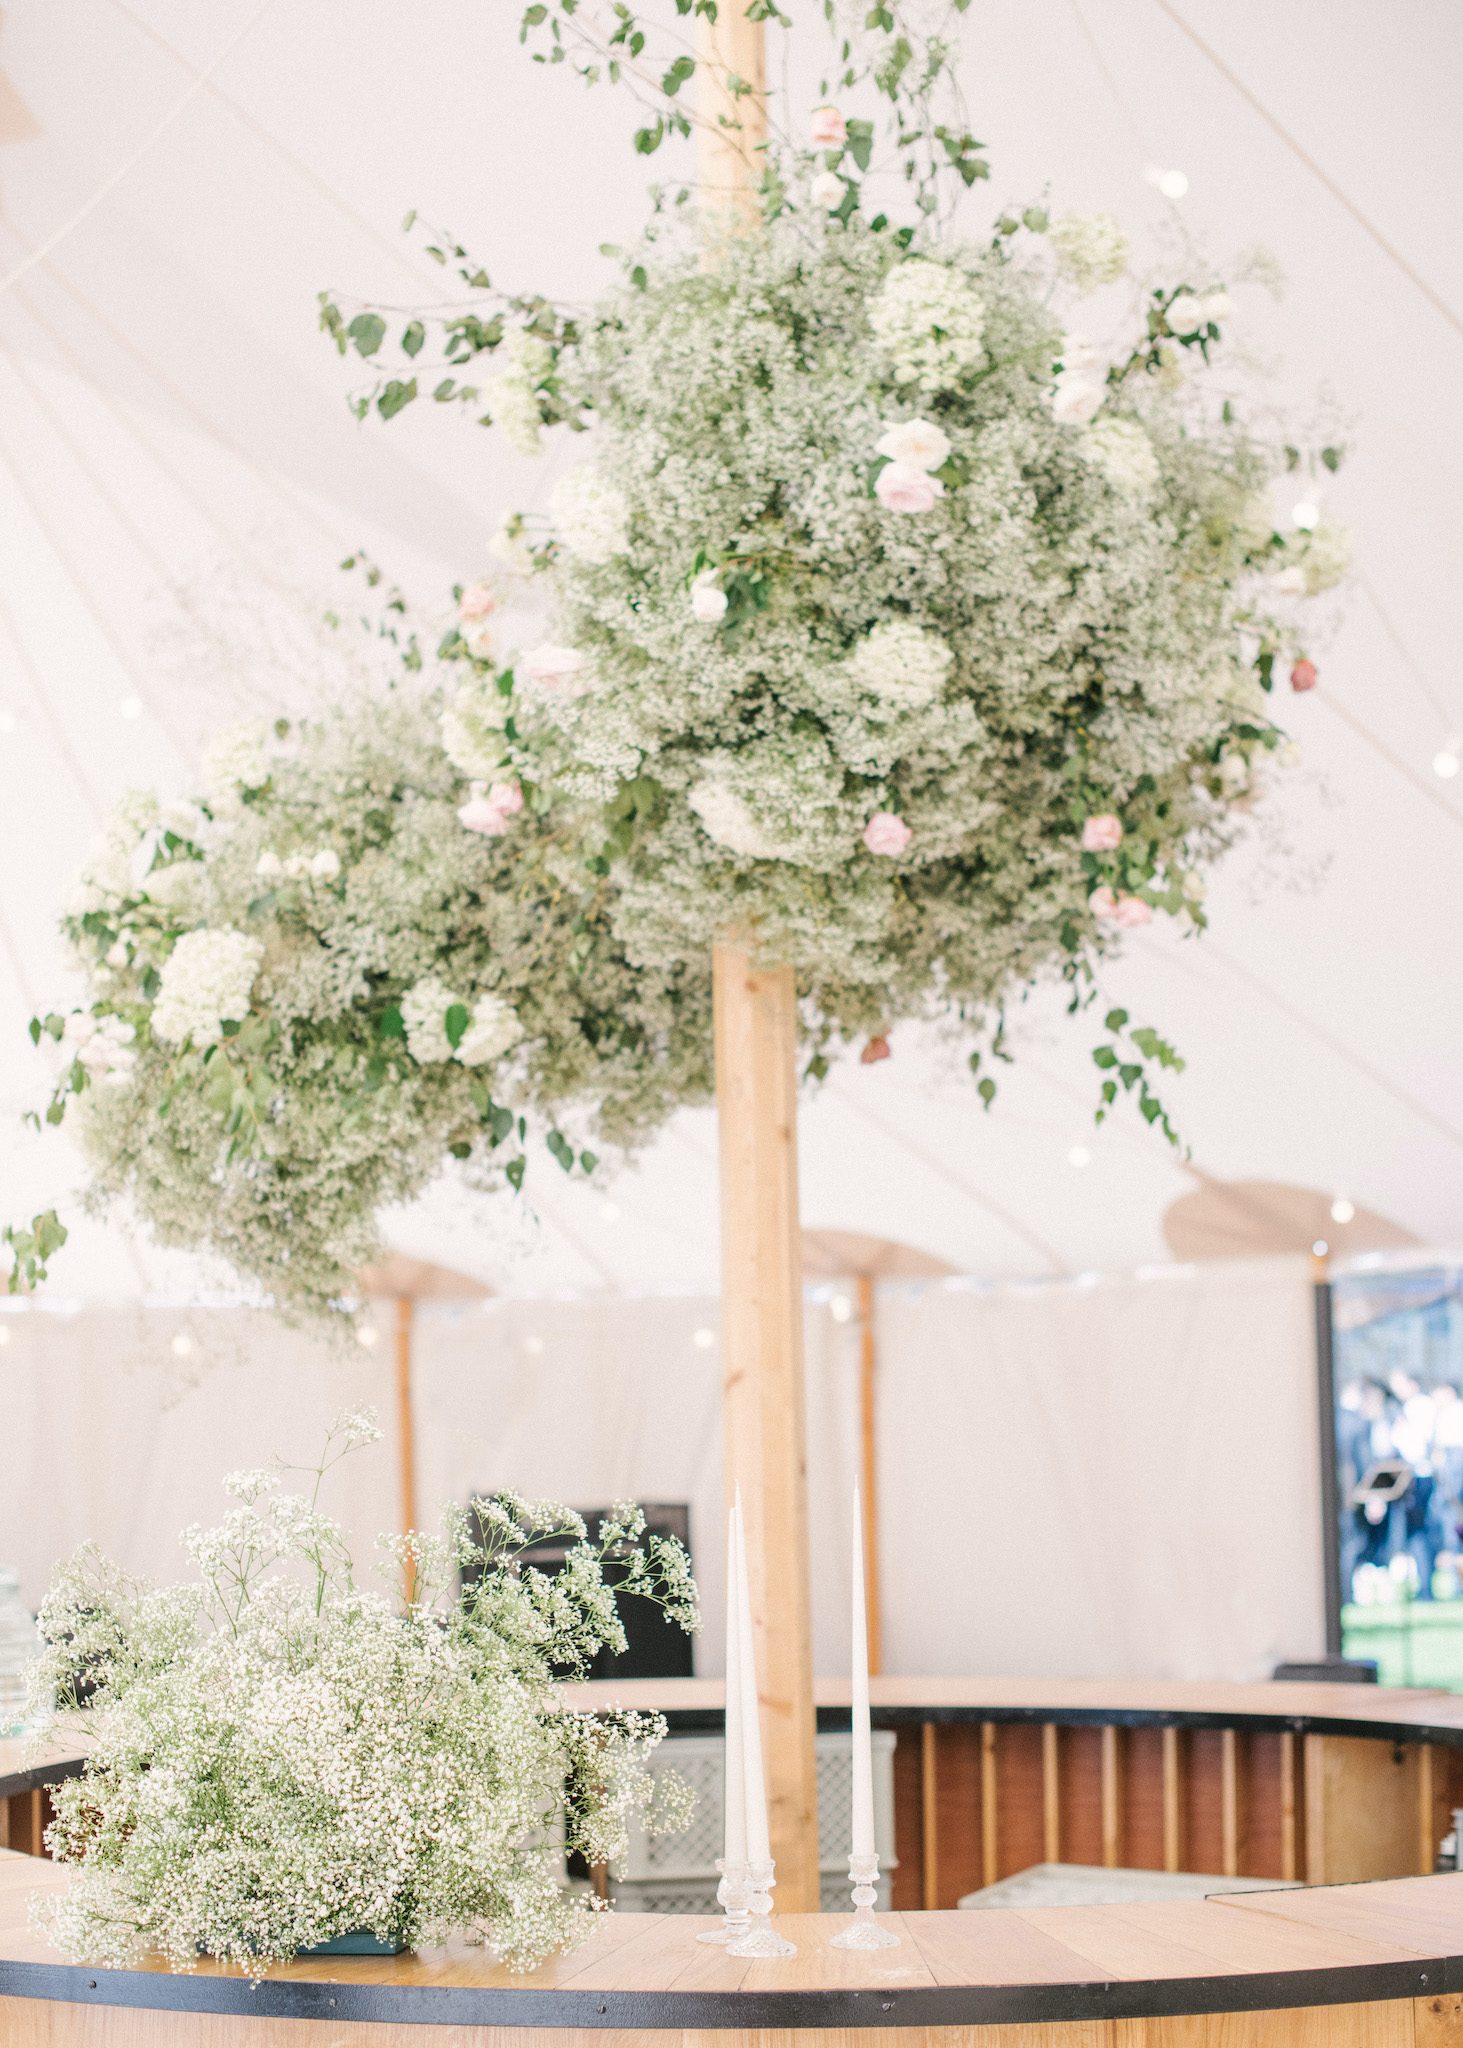 Sperry Tent florals by Aelisabet Flowers, planned Katrina Otter Weddings with The Sail Tent Company